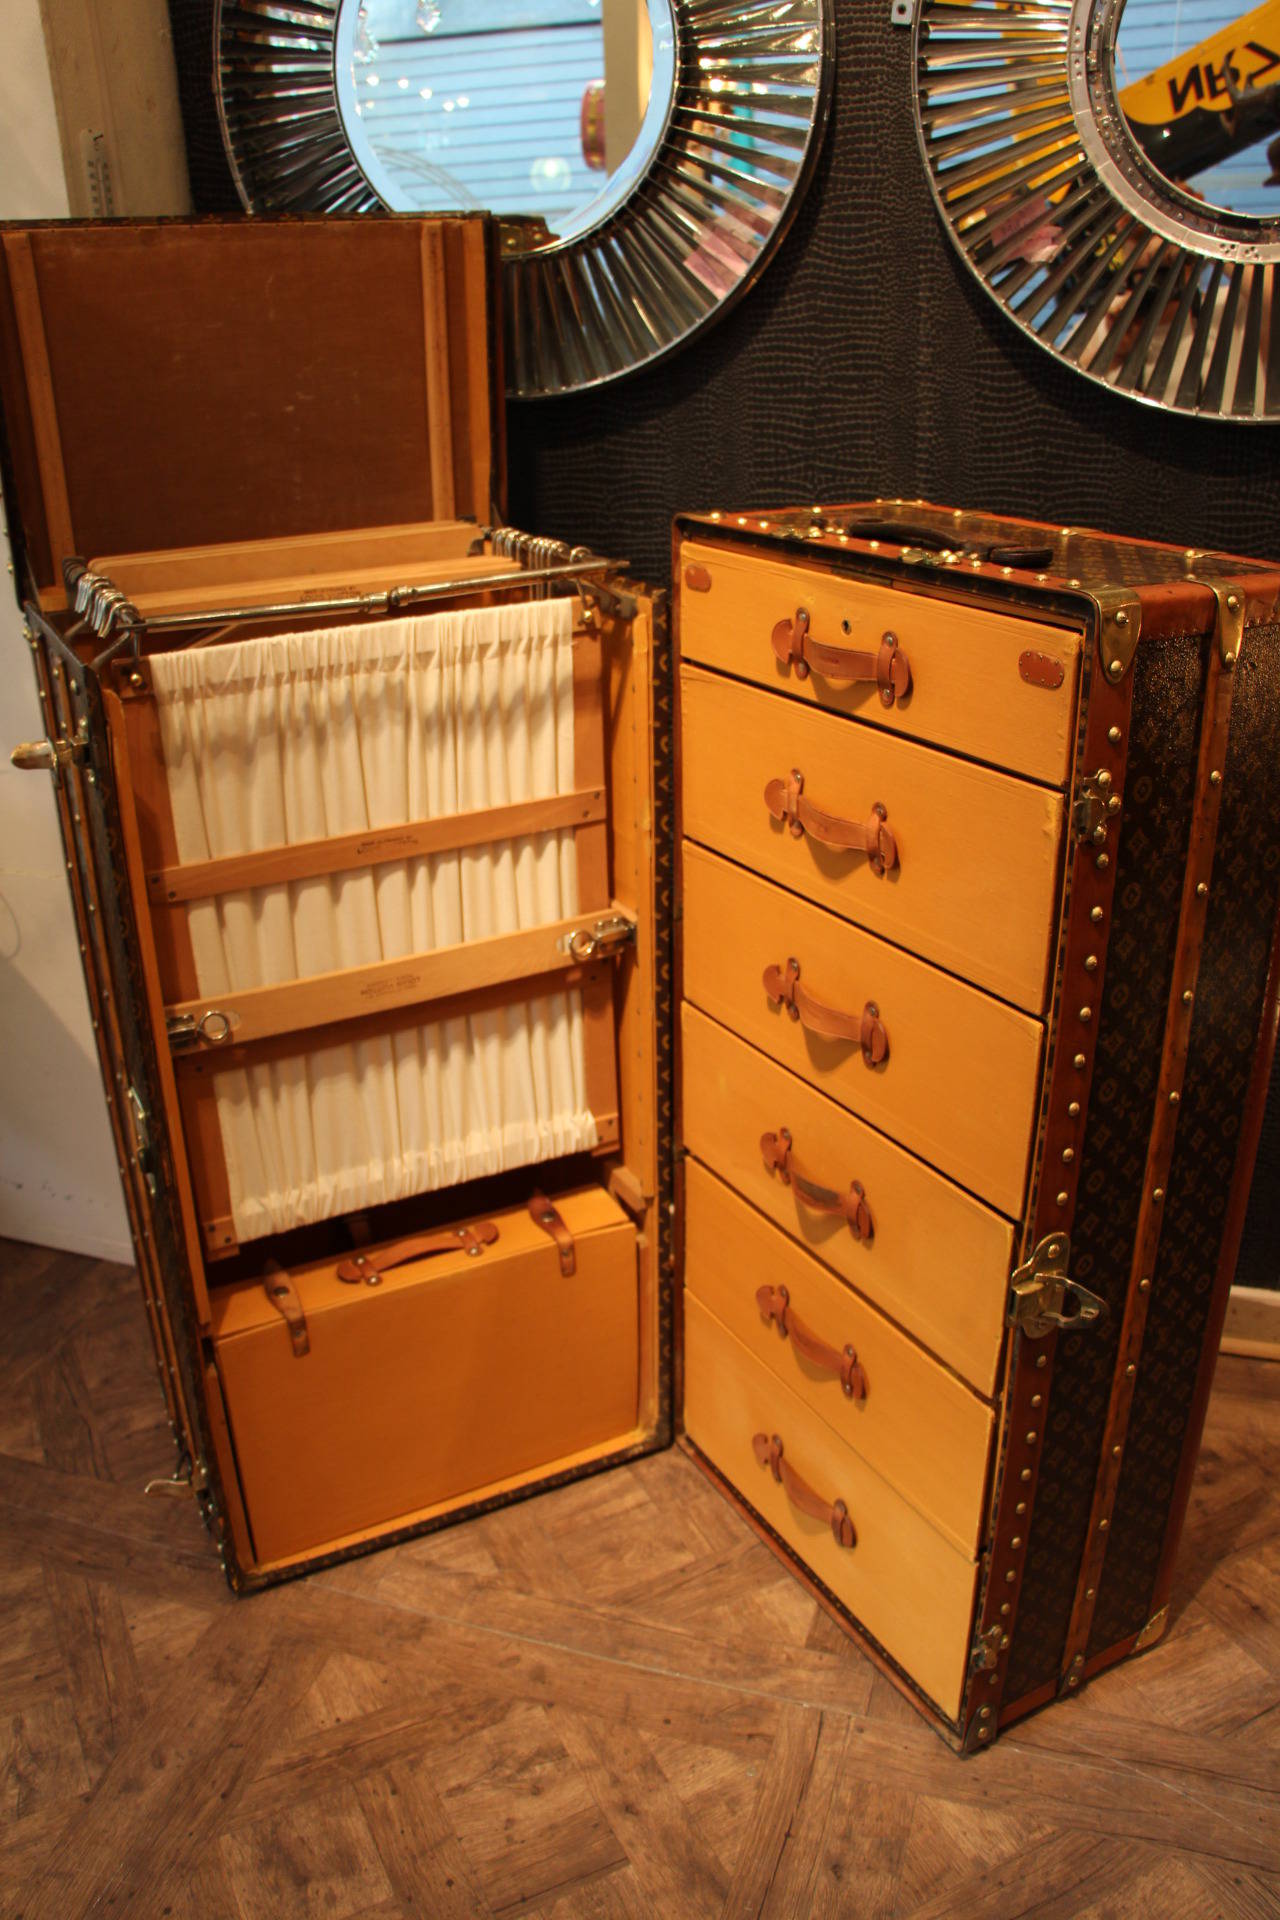 Early 20th Century Extra-Large Louis Vuitton Wardrobe Steamer Trunk